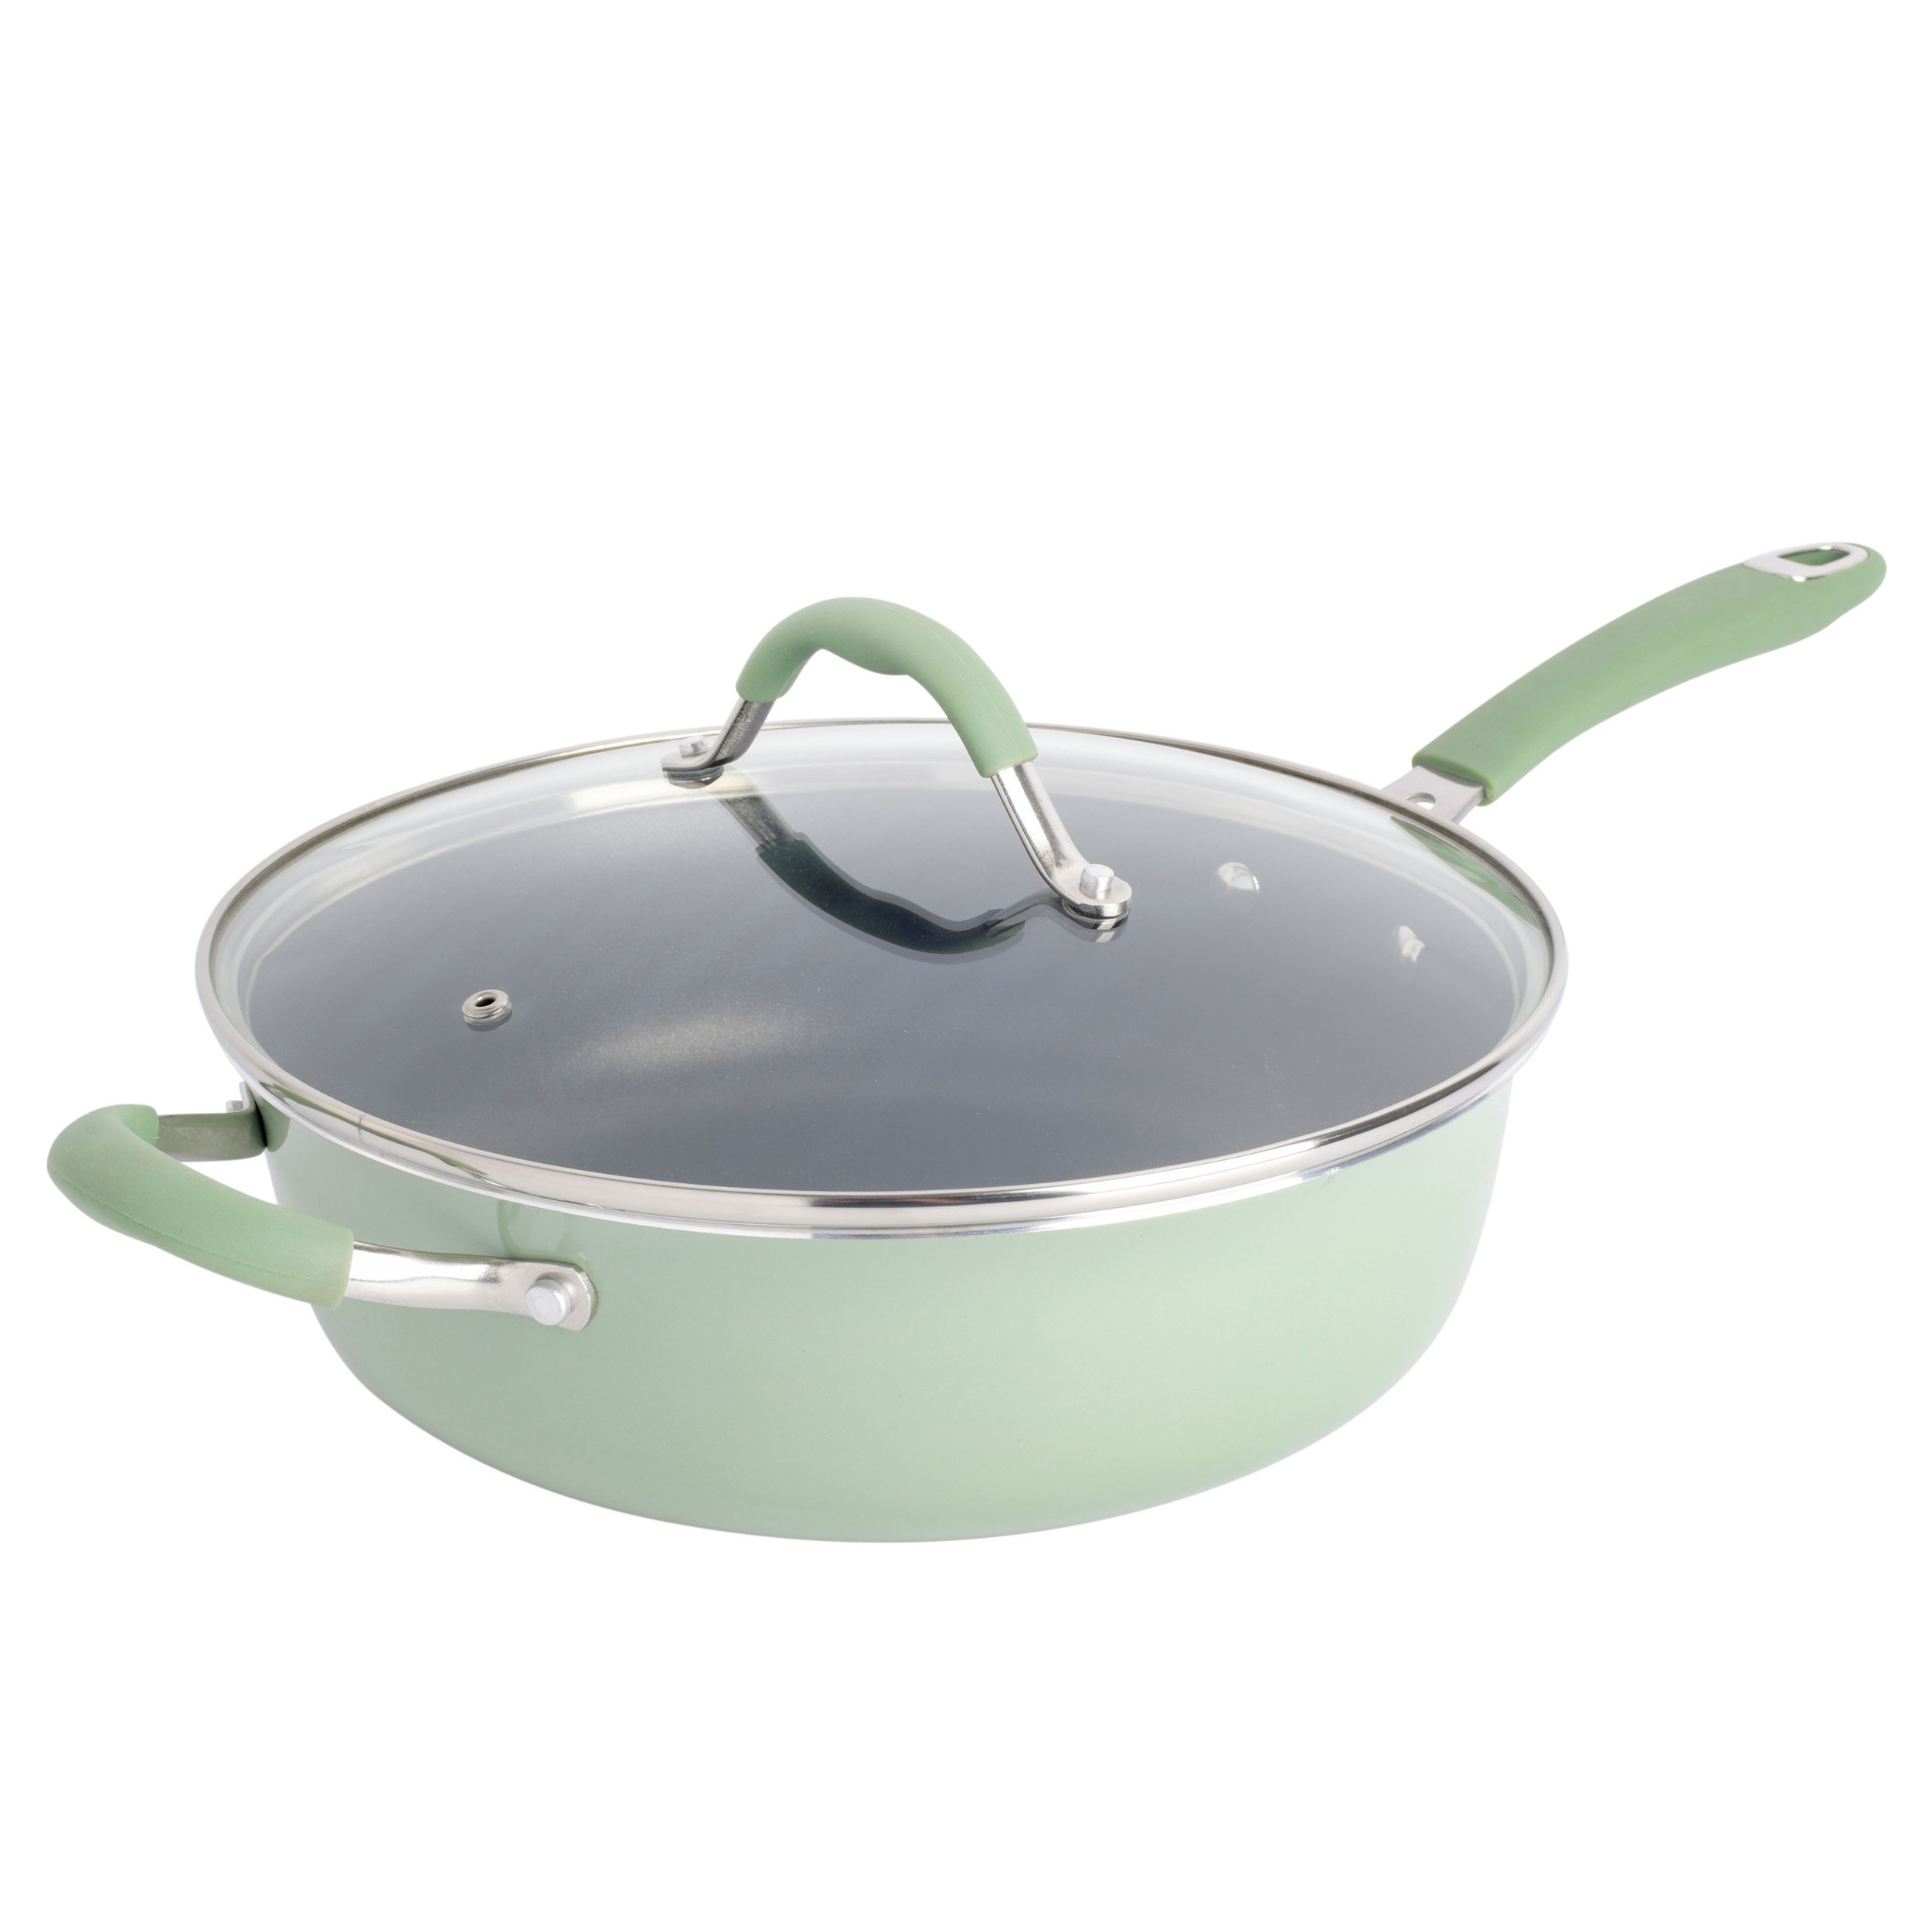 Cravings By Chrissy Teigen 5 Qt Nonstick and 50 similar items